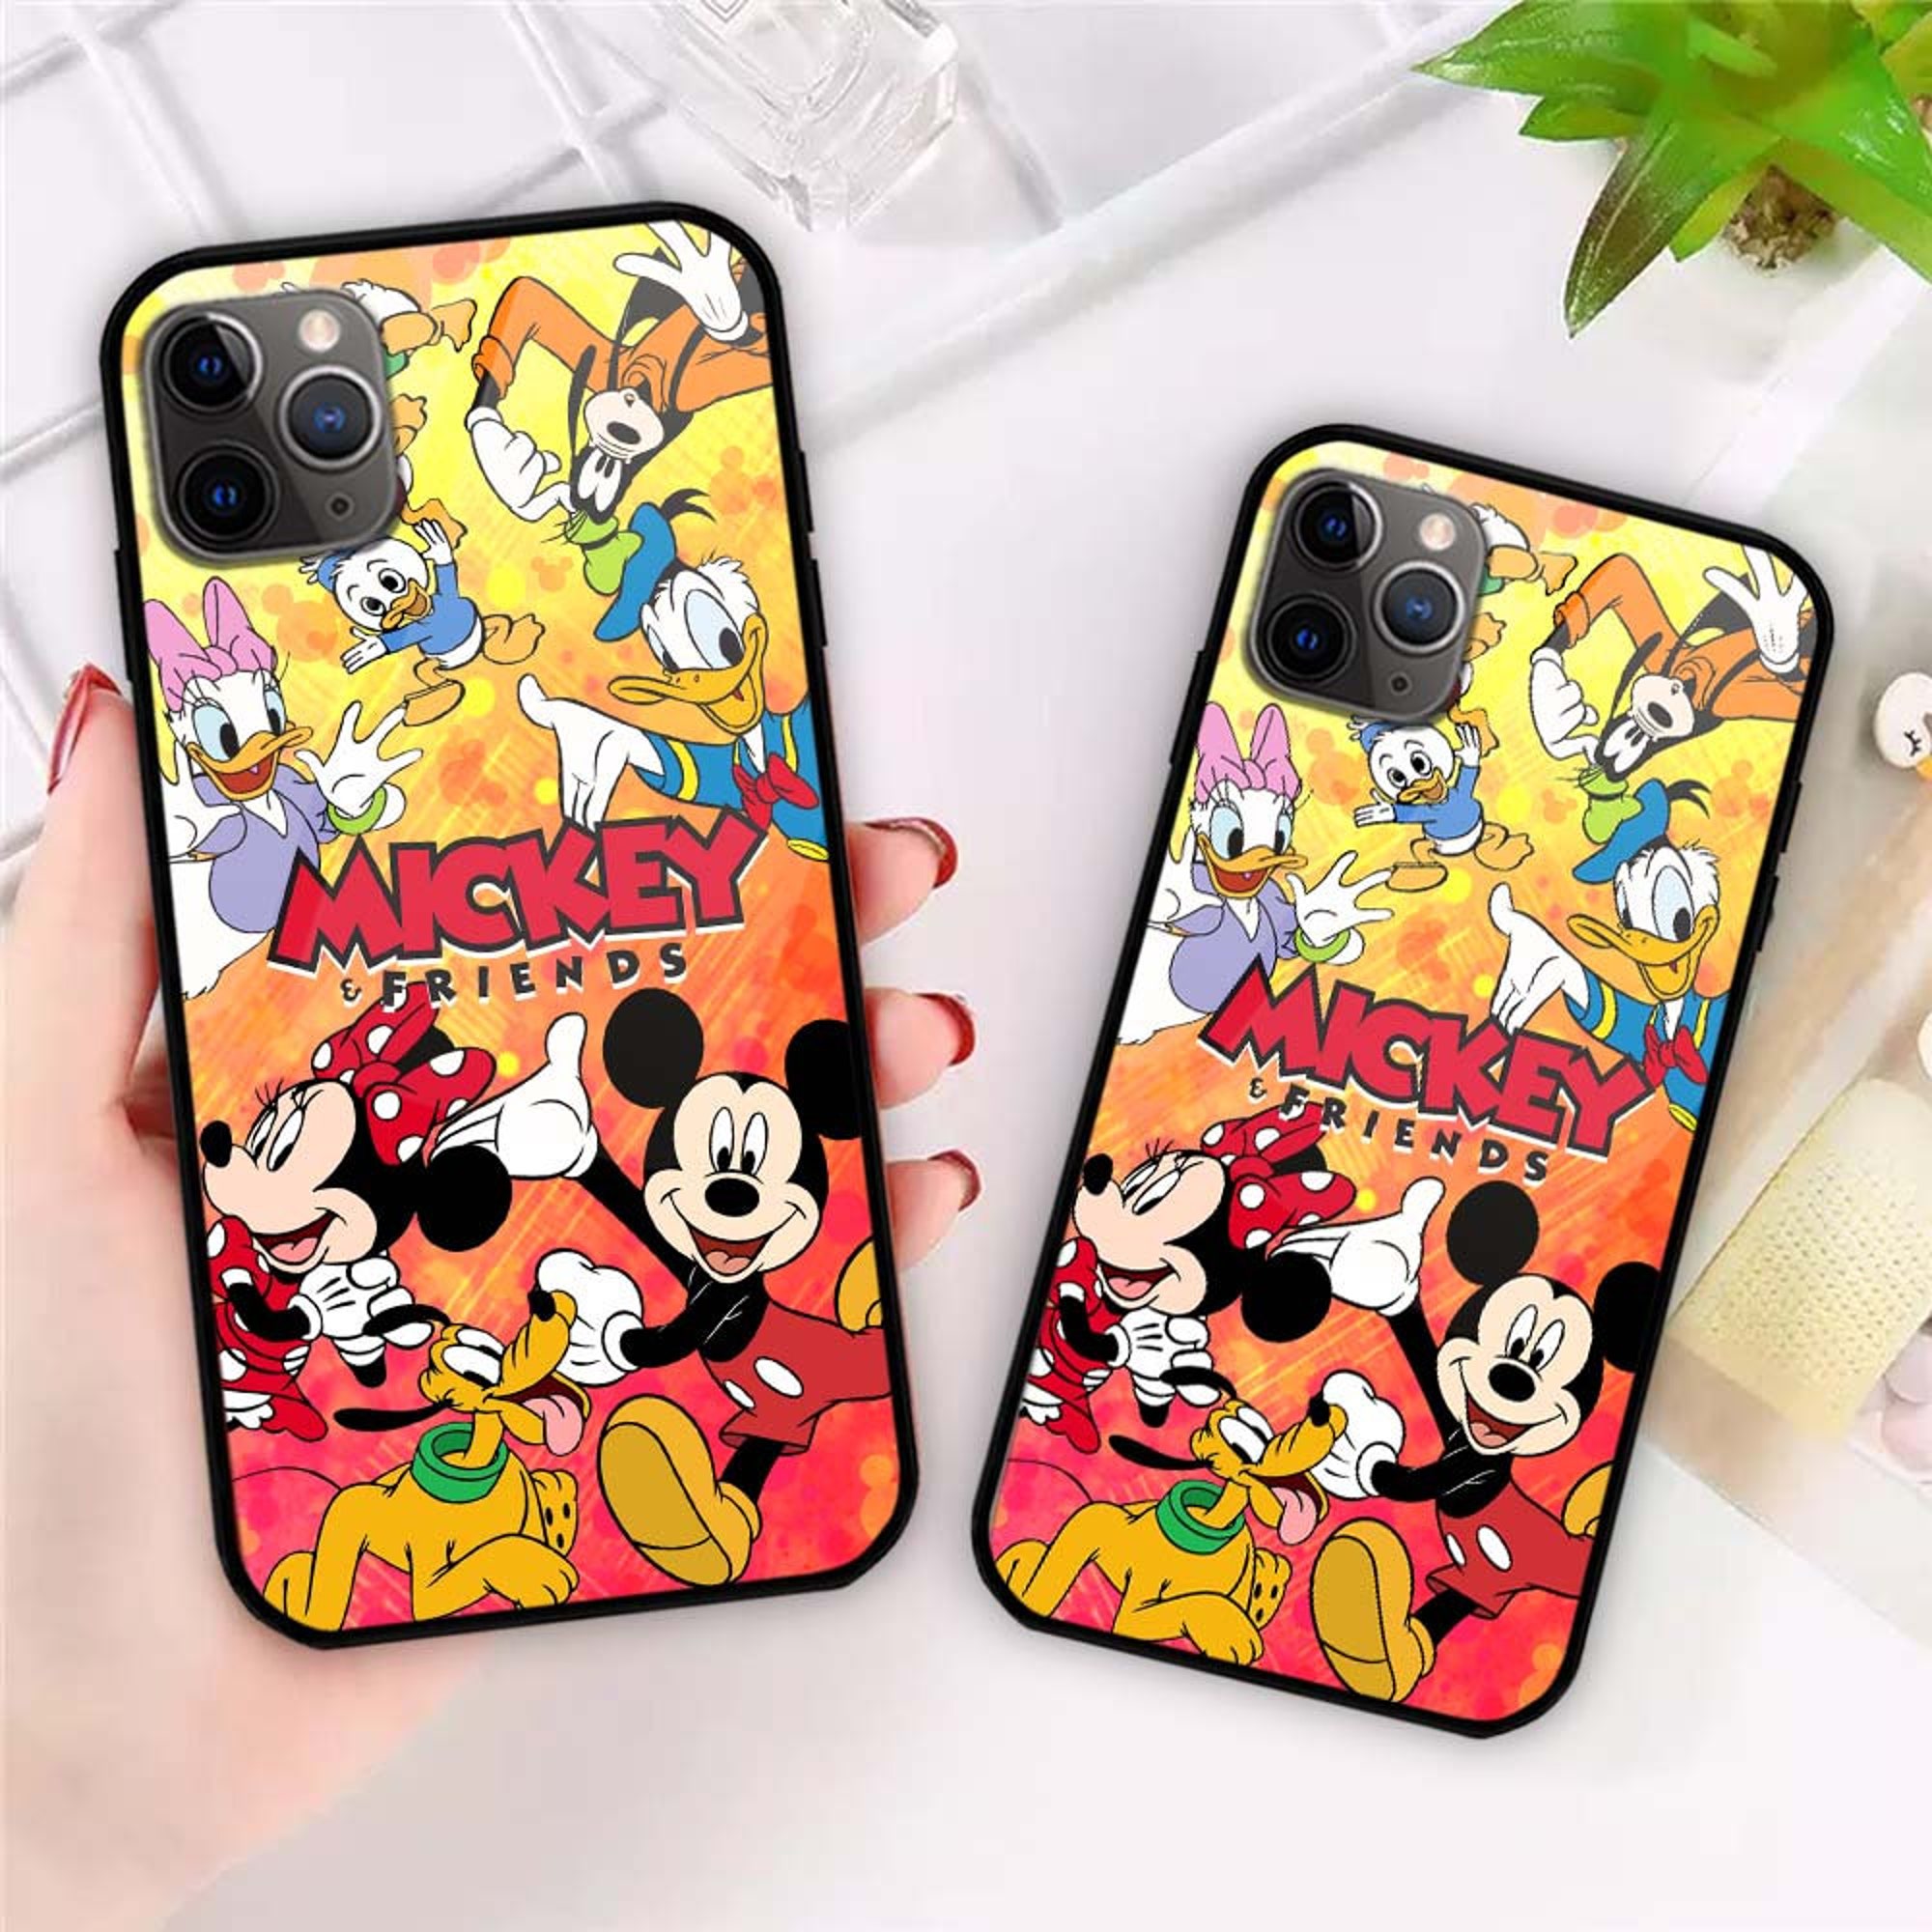 Discover Disney Mickey Mouse & Friends Phone Case iPhone 6,7,8,X,XS,XR,11,12,13